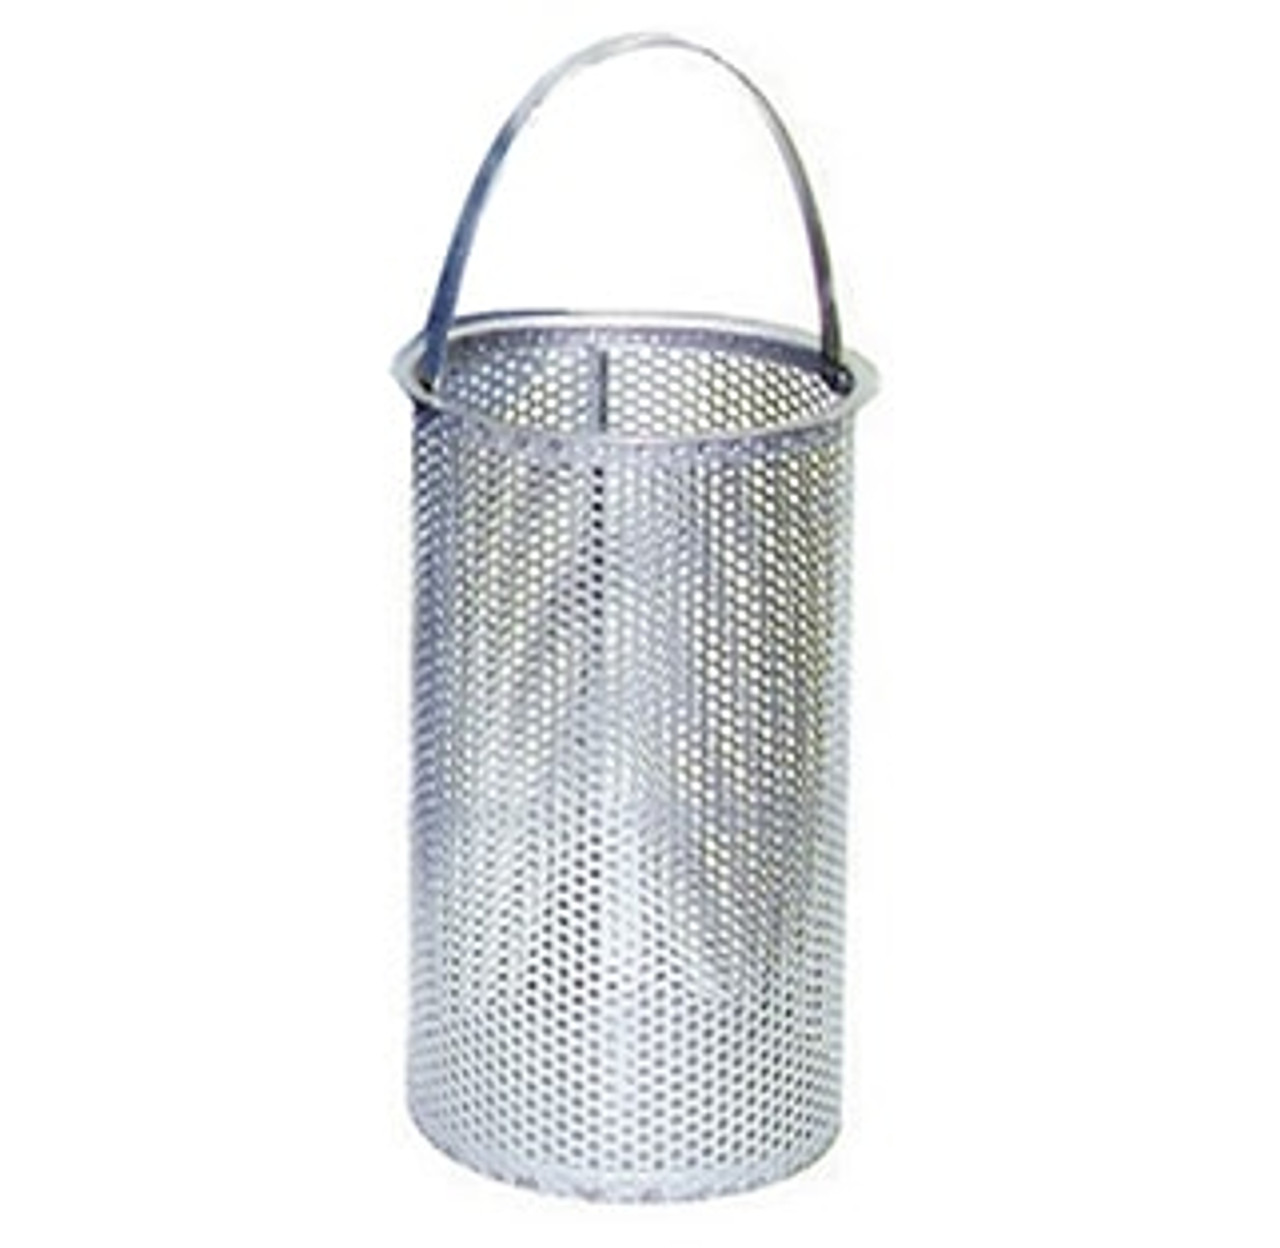 100 Mesh and 5/32" Perforation Replacement Basket for 6" Eaton Model 30R Strainer